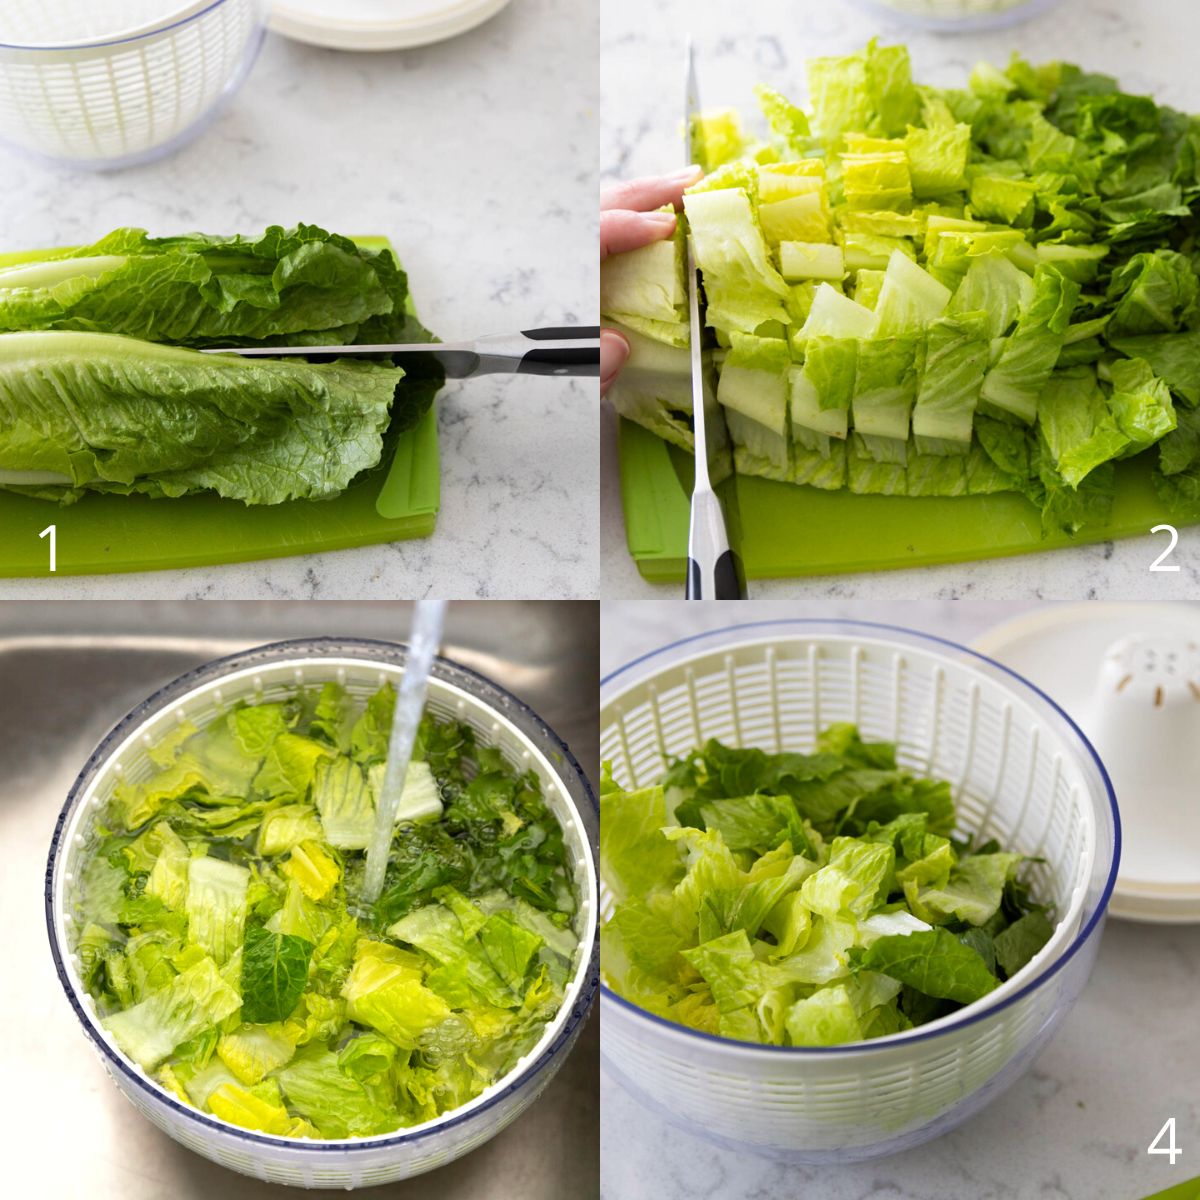 The step by step photos show how to chop fresh romaine and wash it for a garden salad.